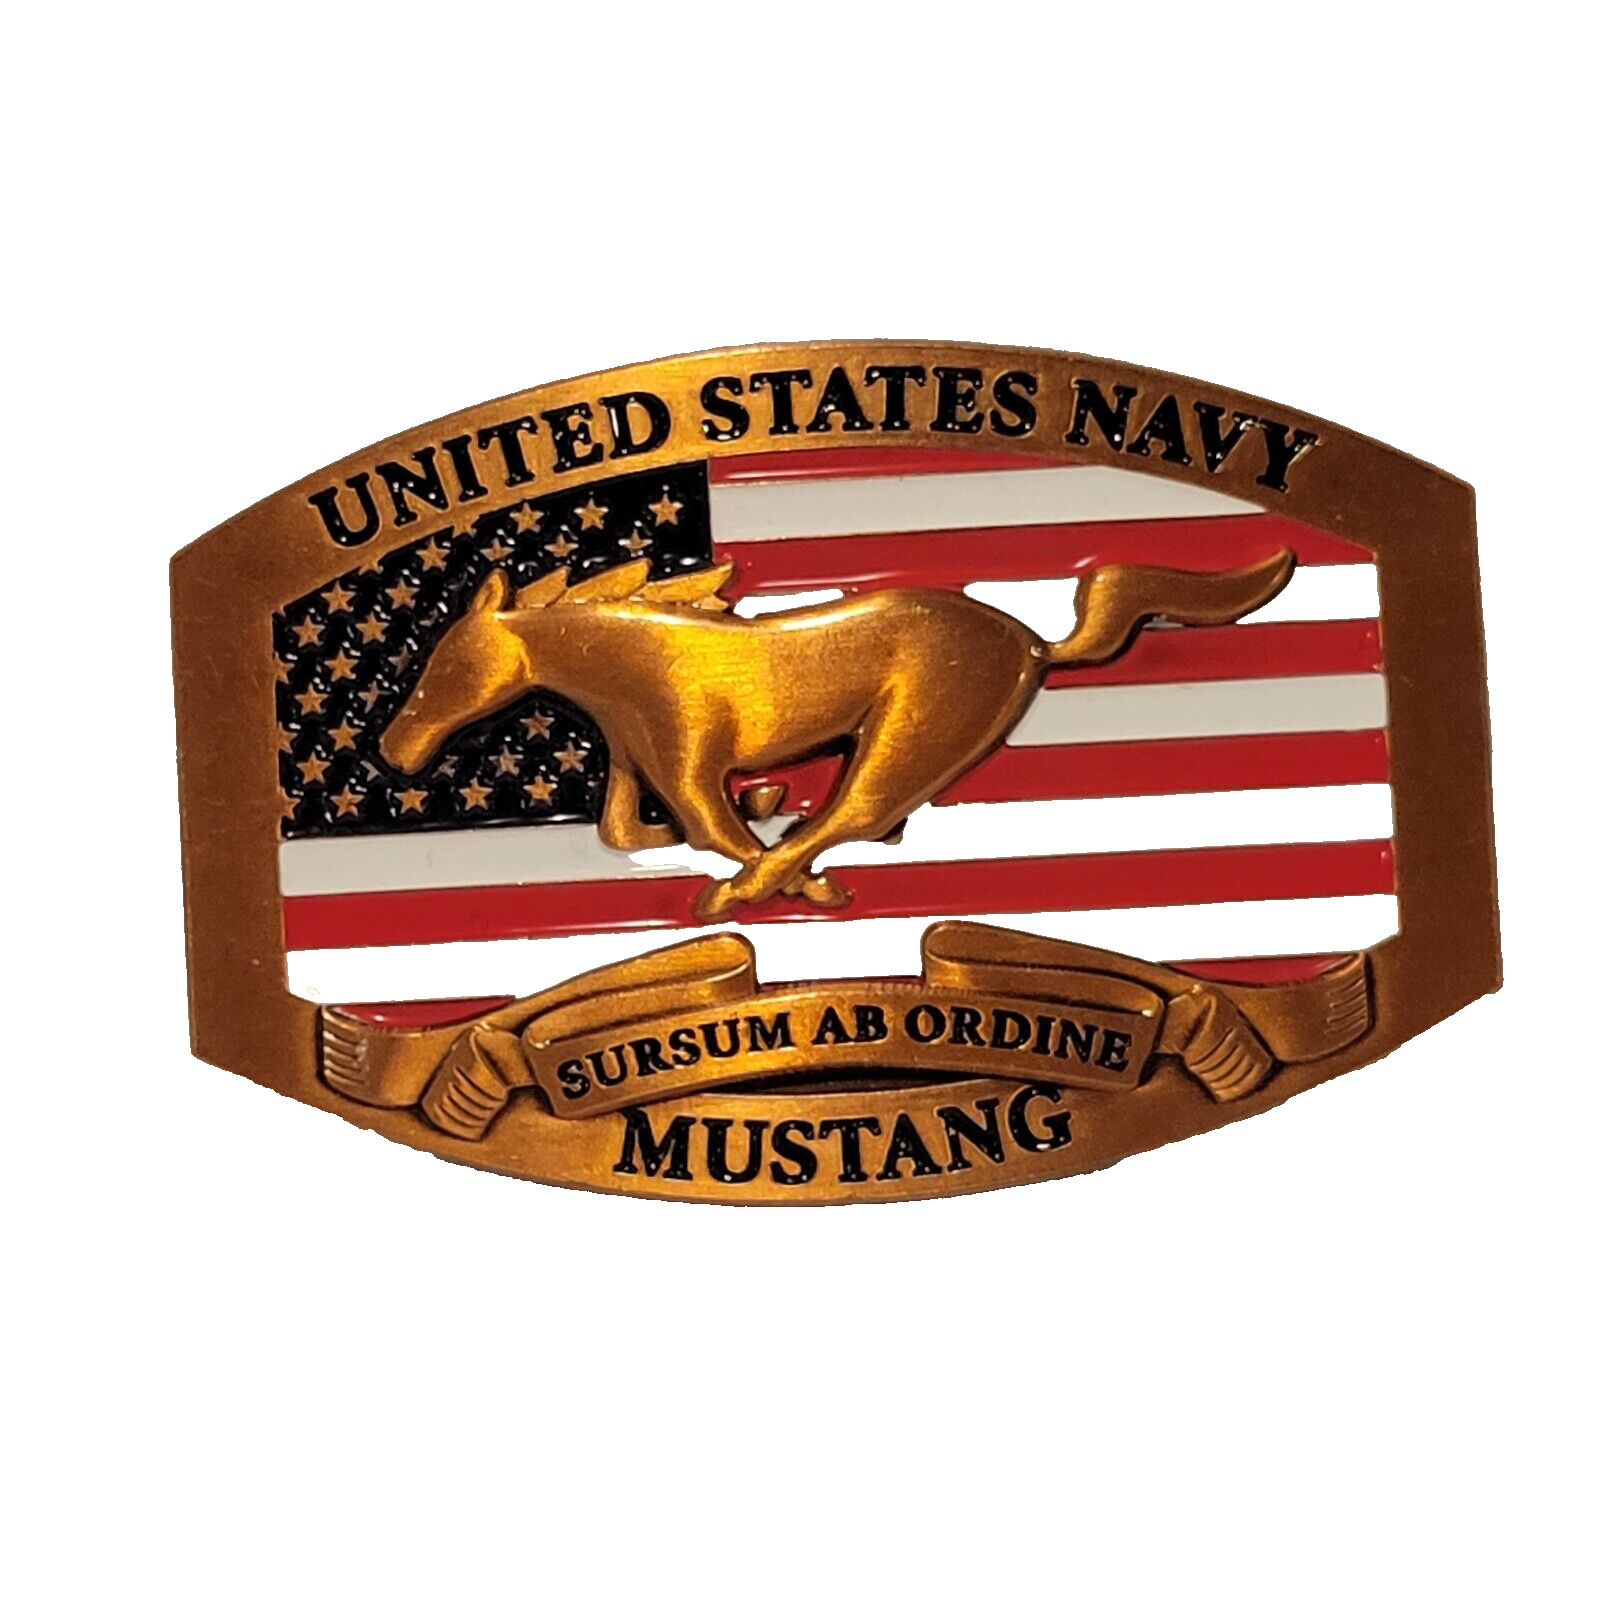 United States Navy Mustang Officer Belt Buckle - 4 Colors Available - 3D Logo